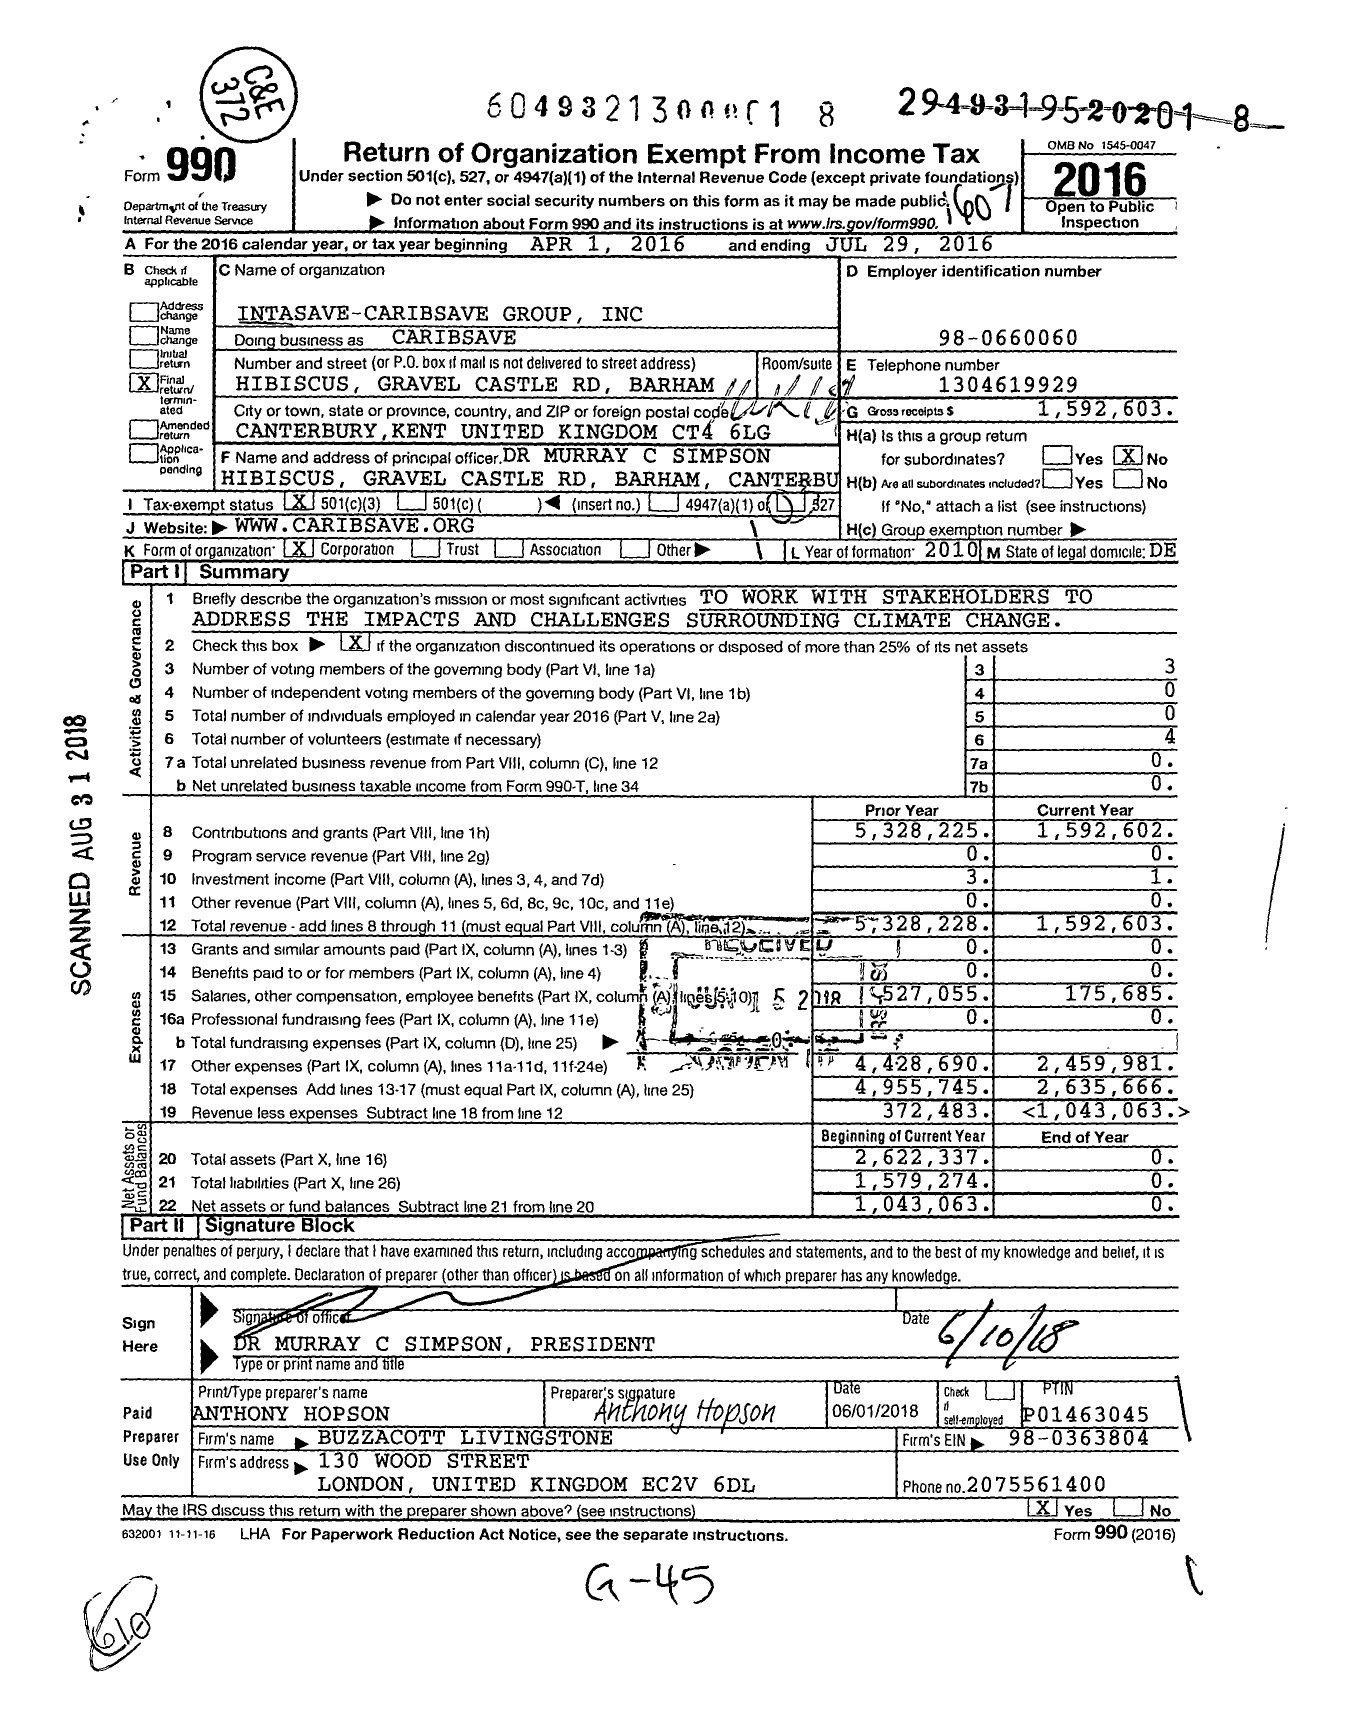 Image of first page of 2015 Form 990 for Intasave Caribsave Group